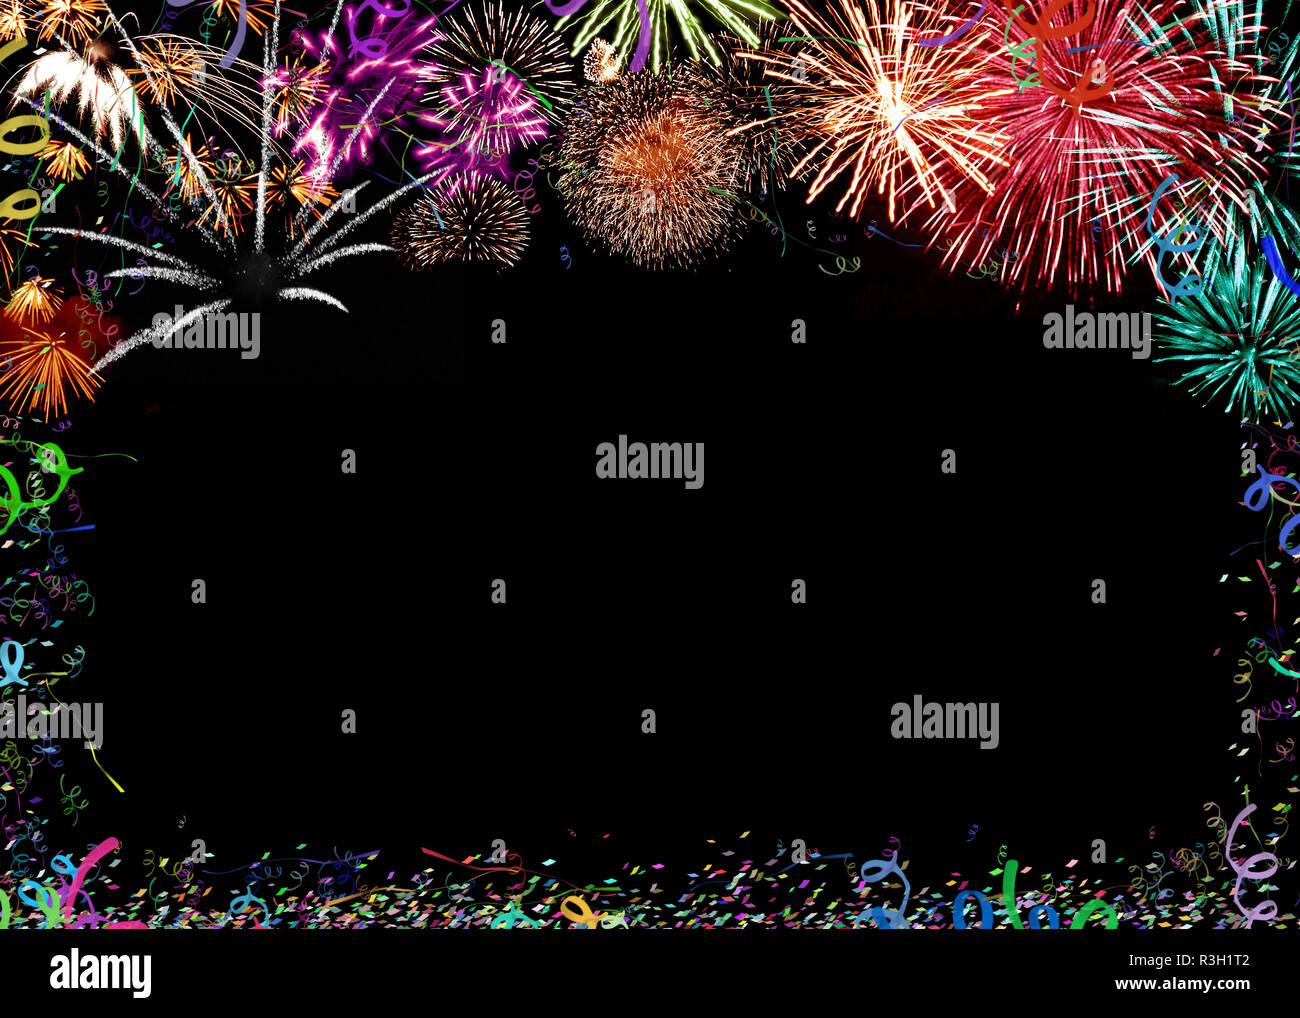 colorful fireworks with confetti and streamers Stock Photo